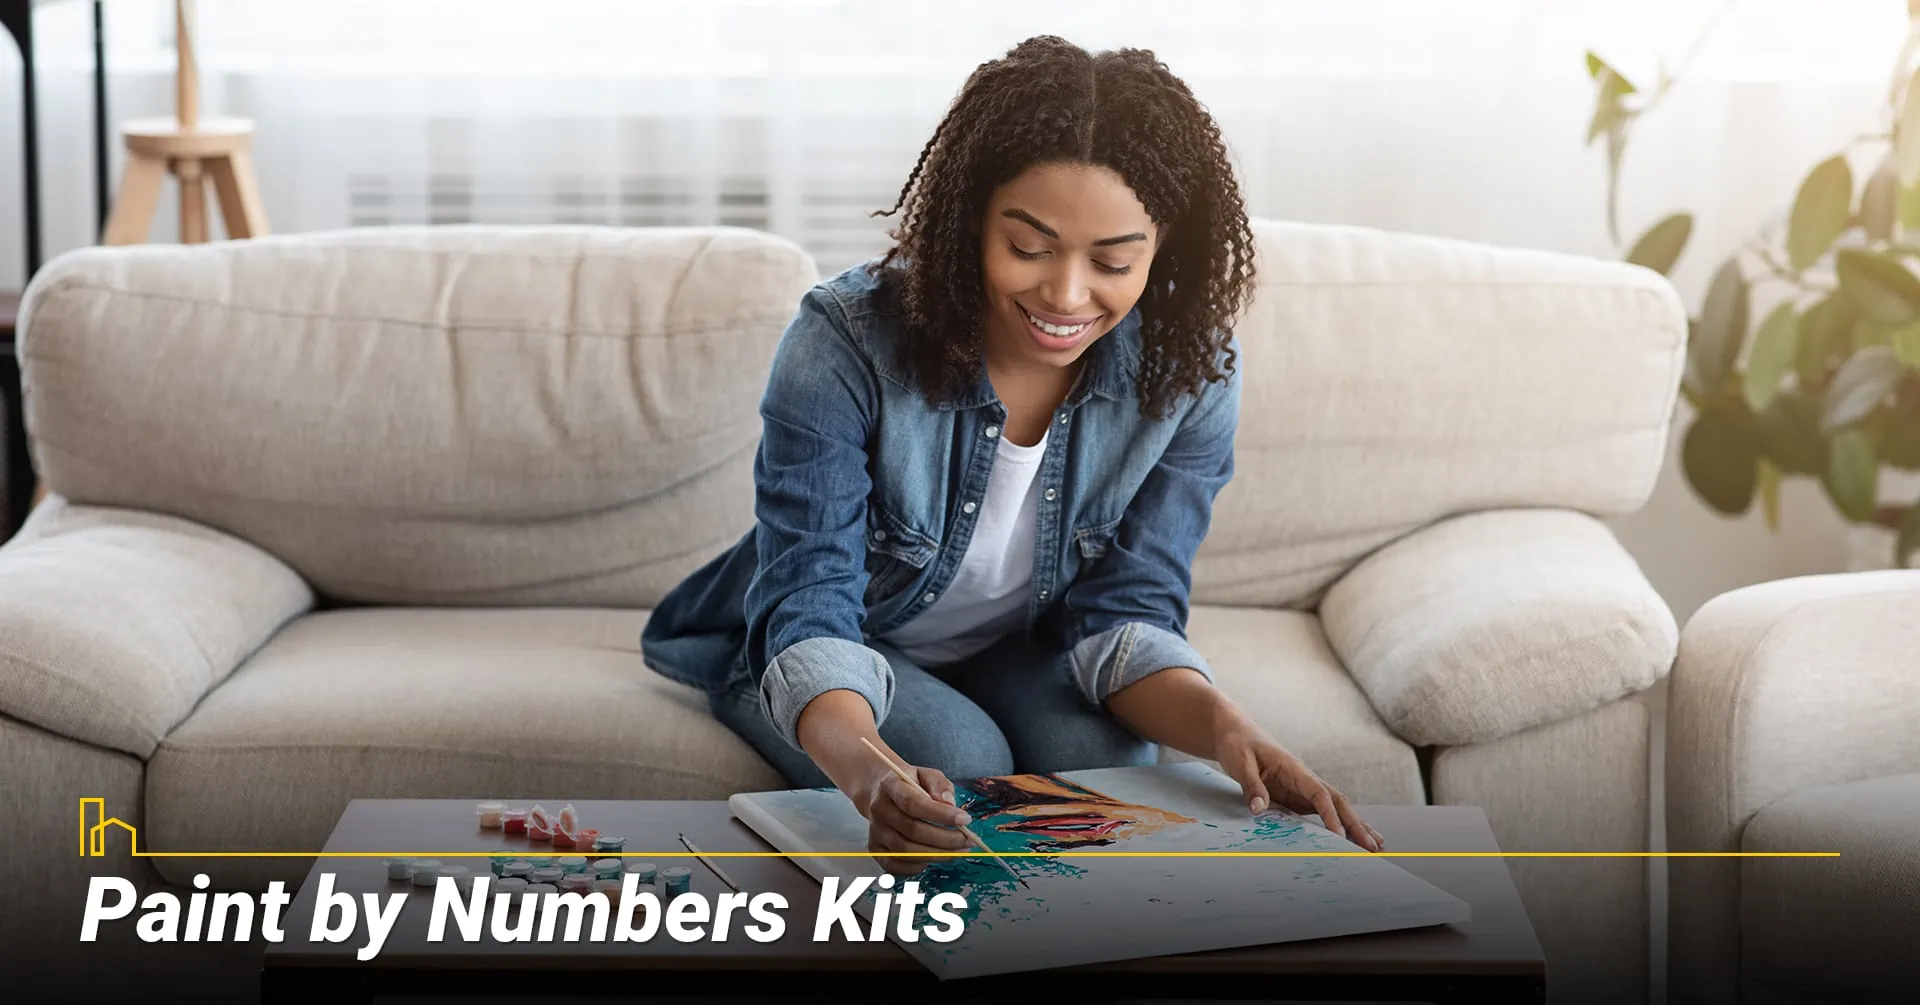 Paint by Numbers Kits